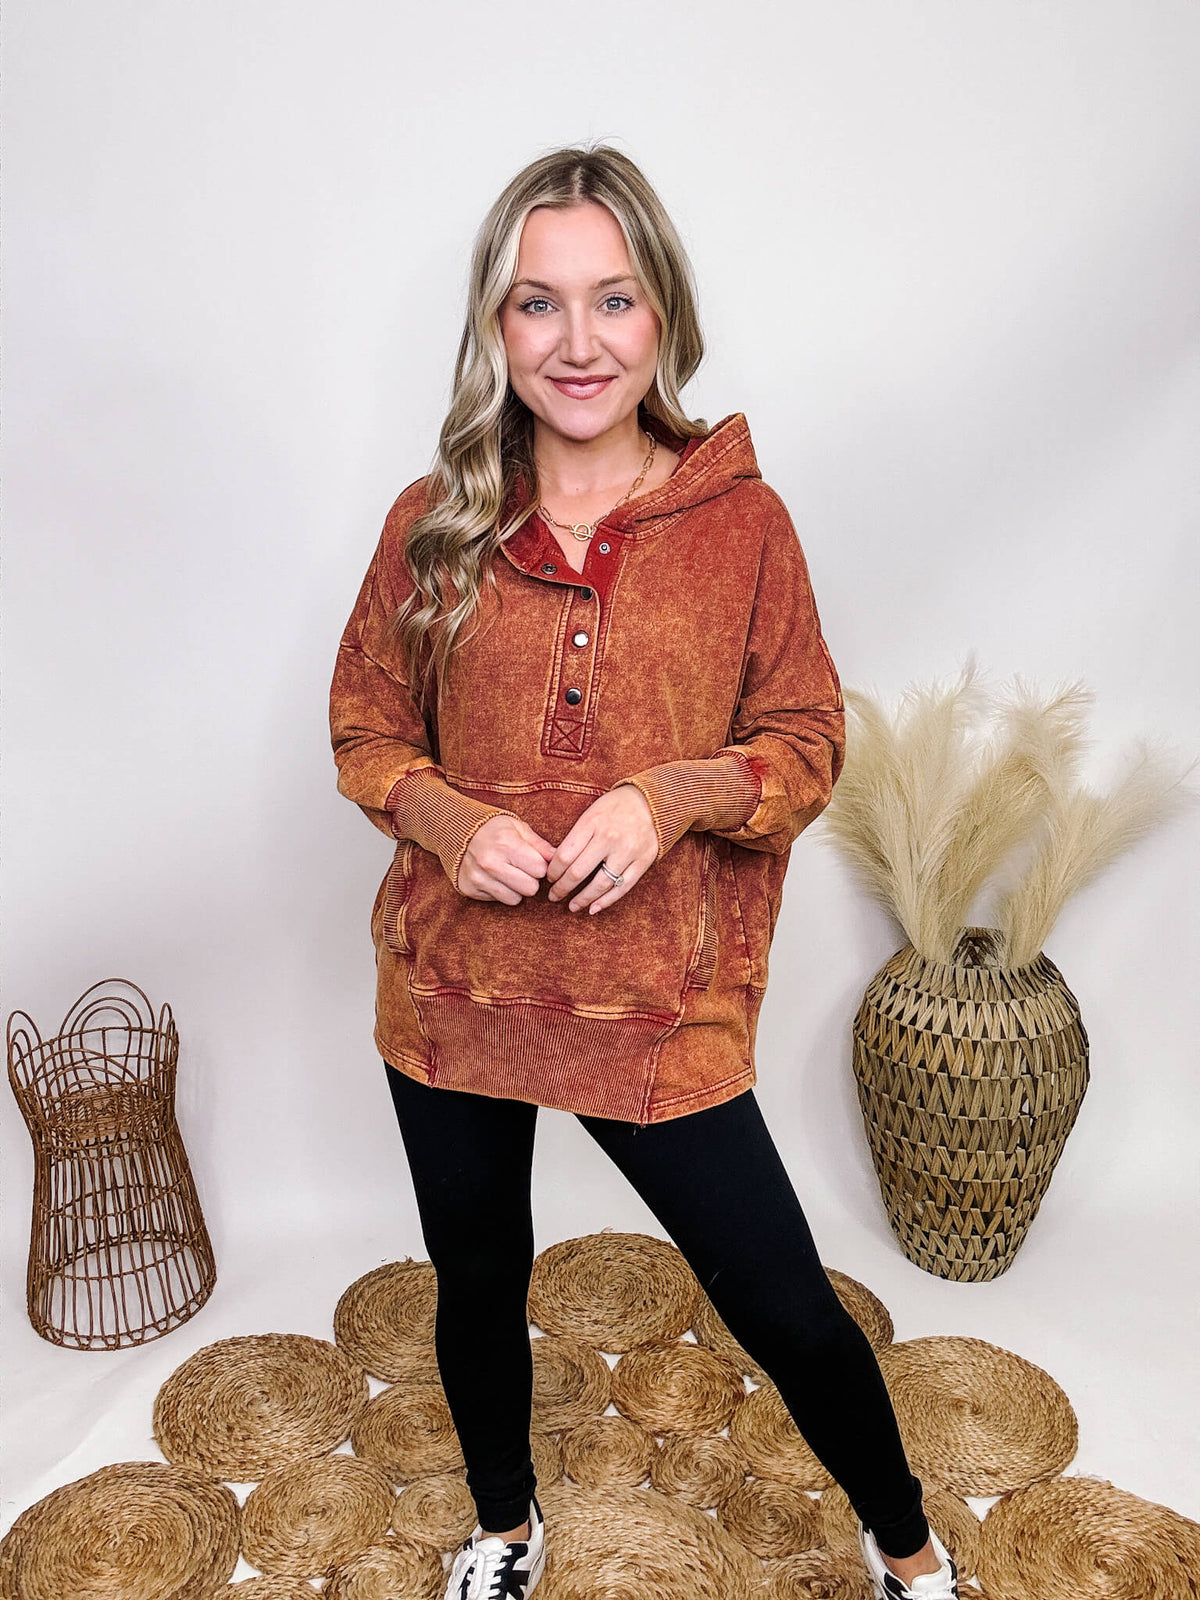 Zenana Rusty Orange Acid Washed Long Sleeve Pullover Hoodie Half Button Up Kangaroo Pocket Ribbed Details Lightweight French Terry Material Oversized Fit 100% Cotton  ** Each item will be unique due to the acid wash.